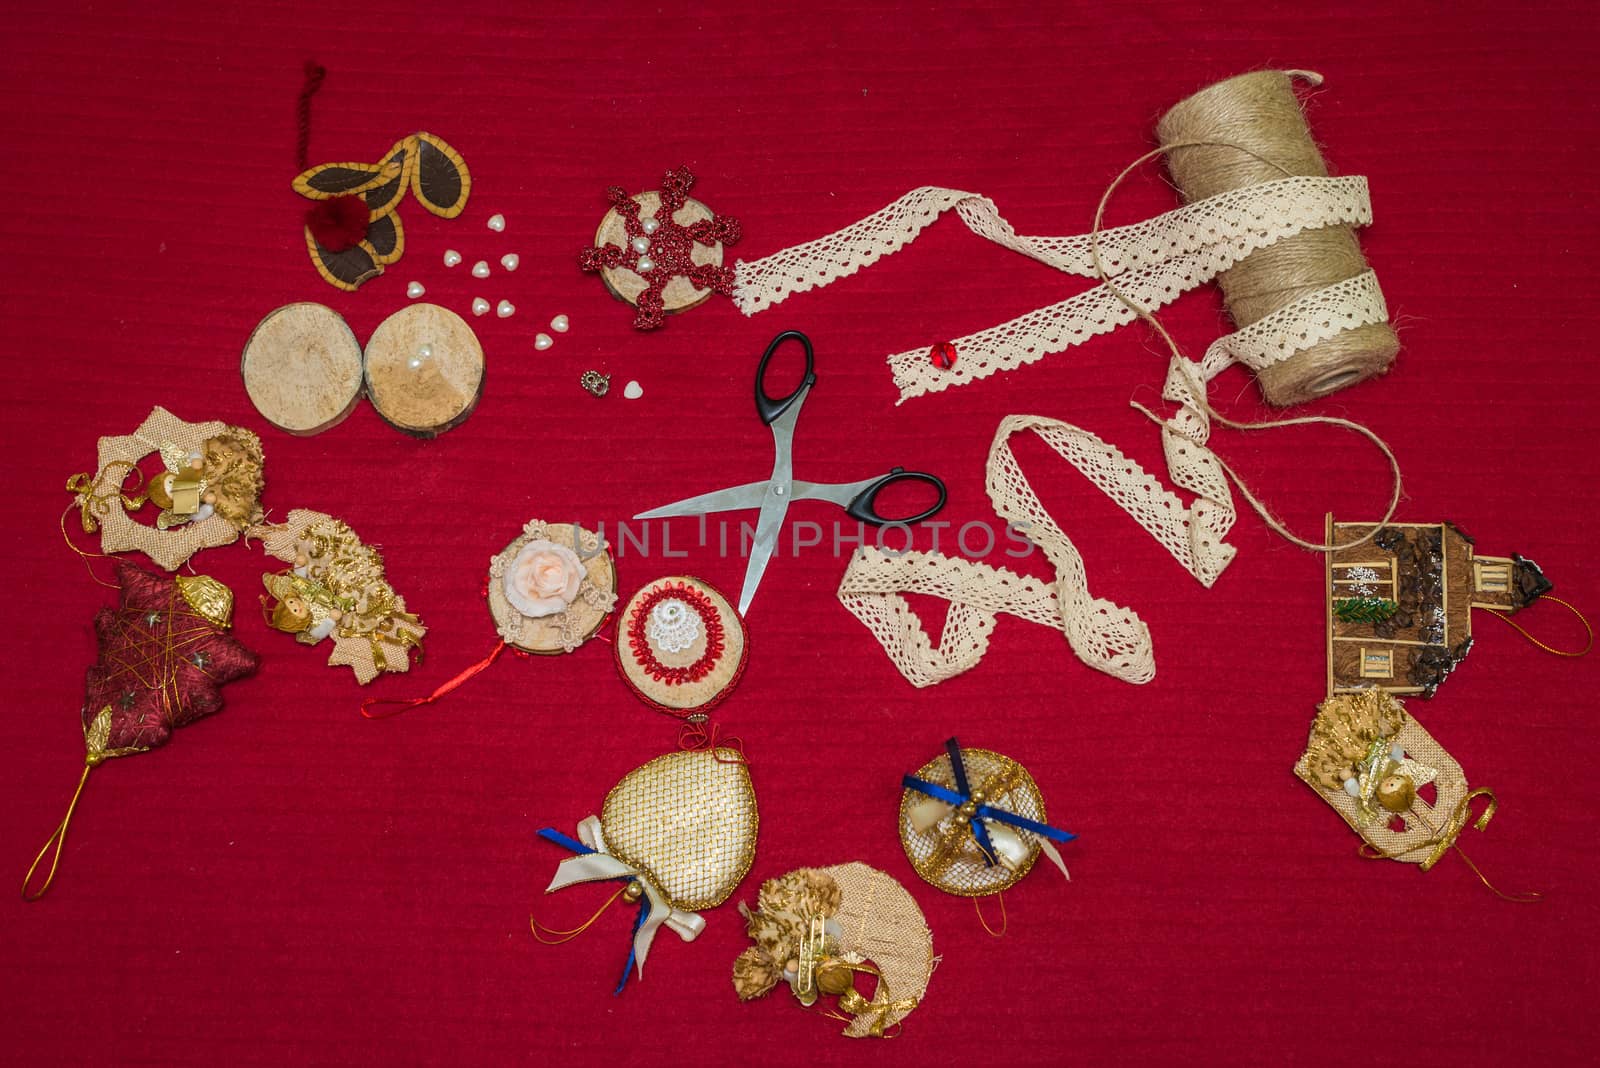 handmade Christmas decorations and toys on a red background